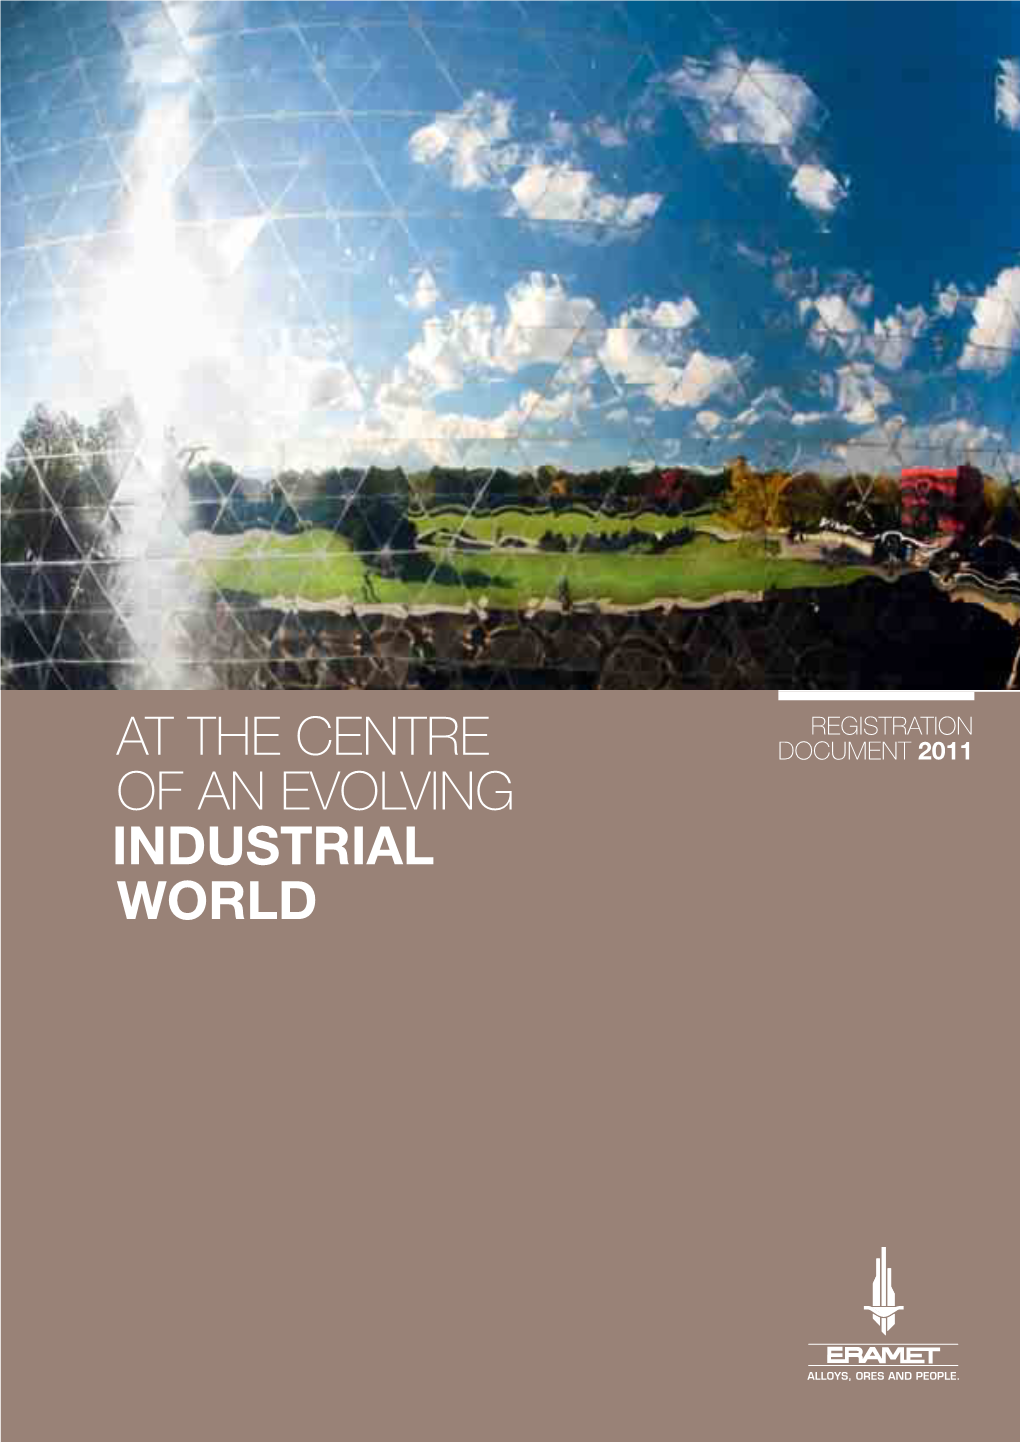 At the Centre of an Evolving Industrial World